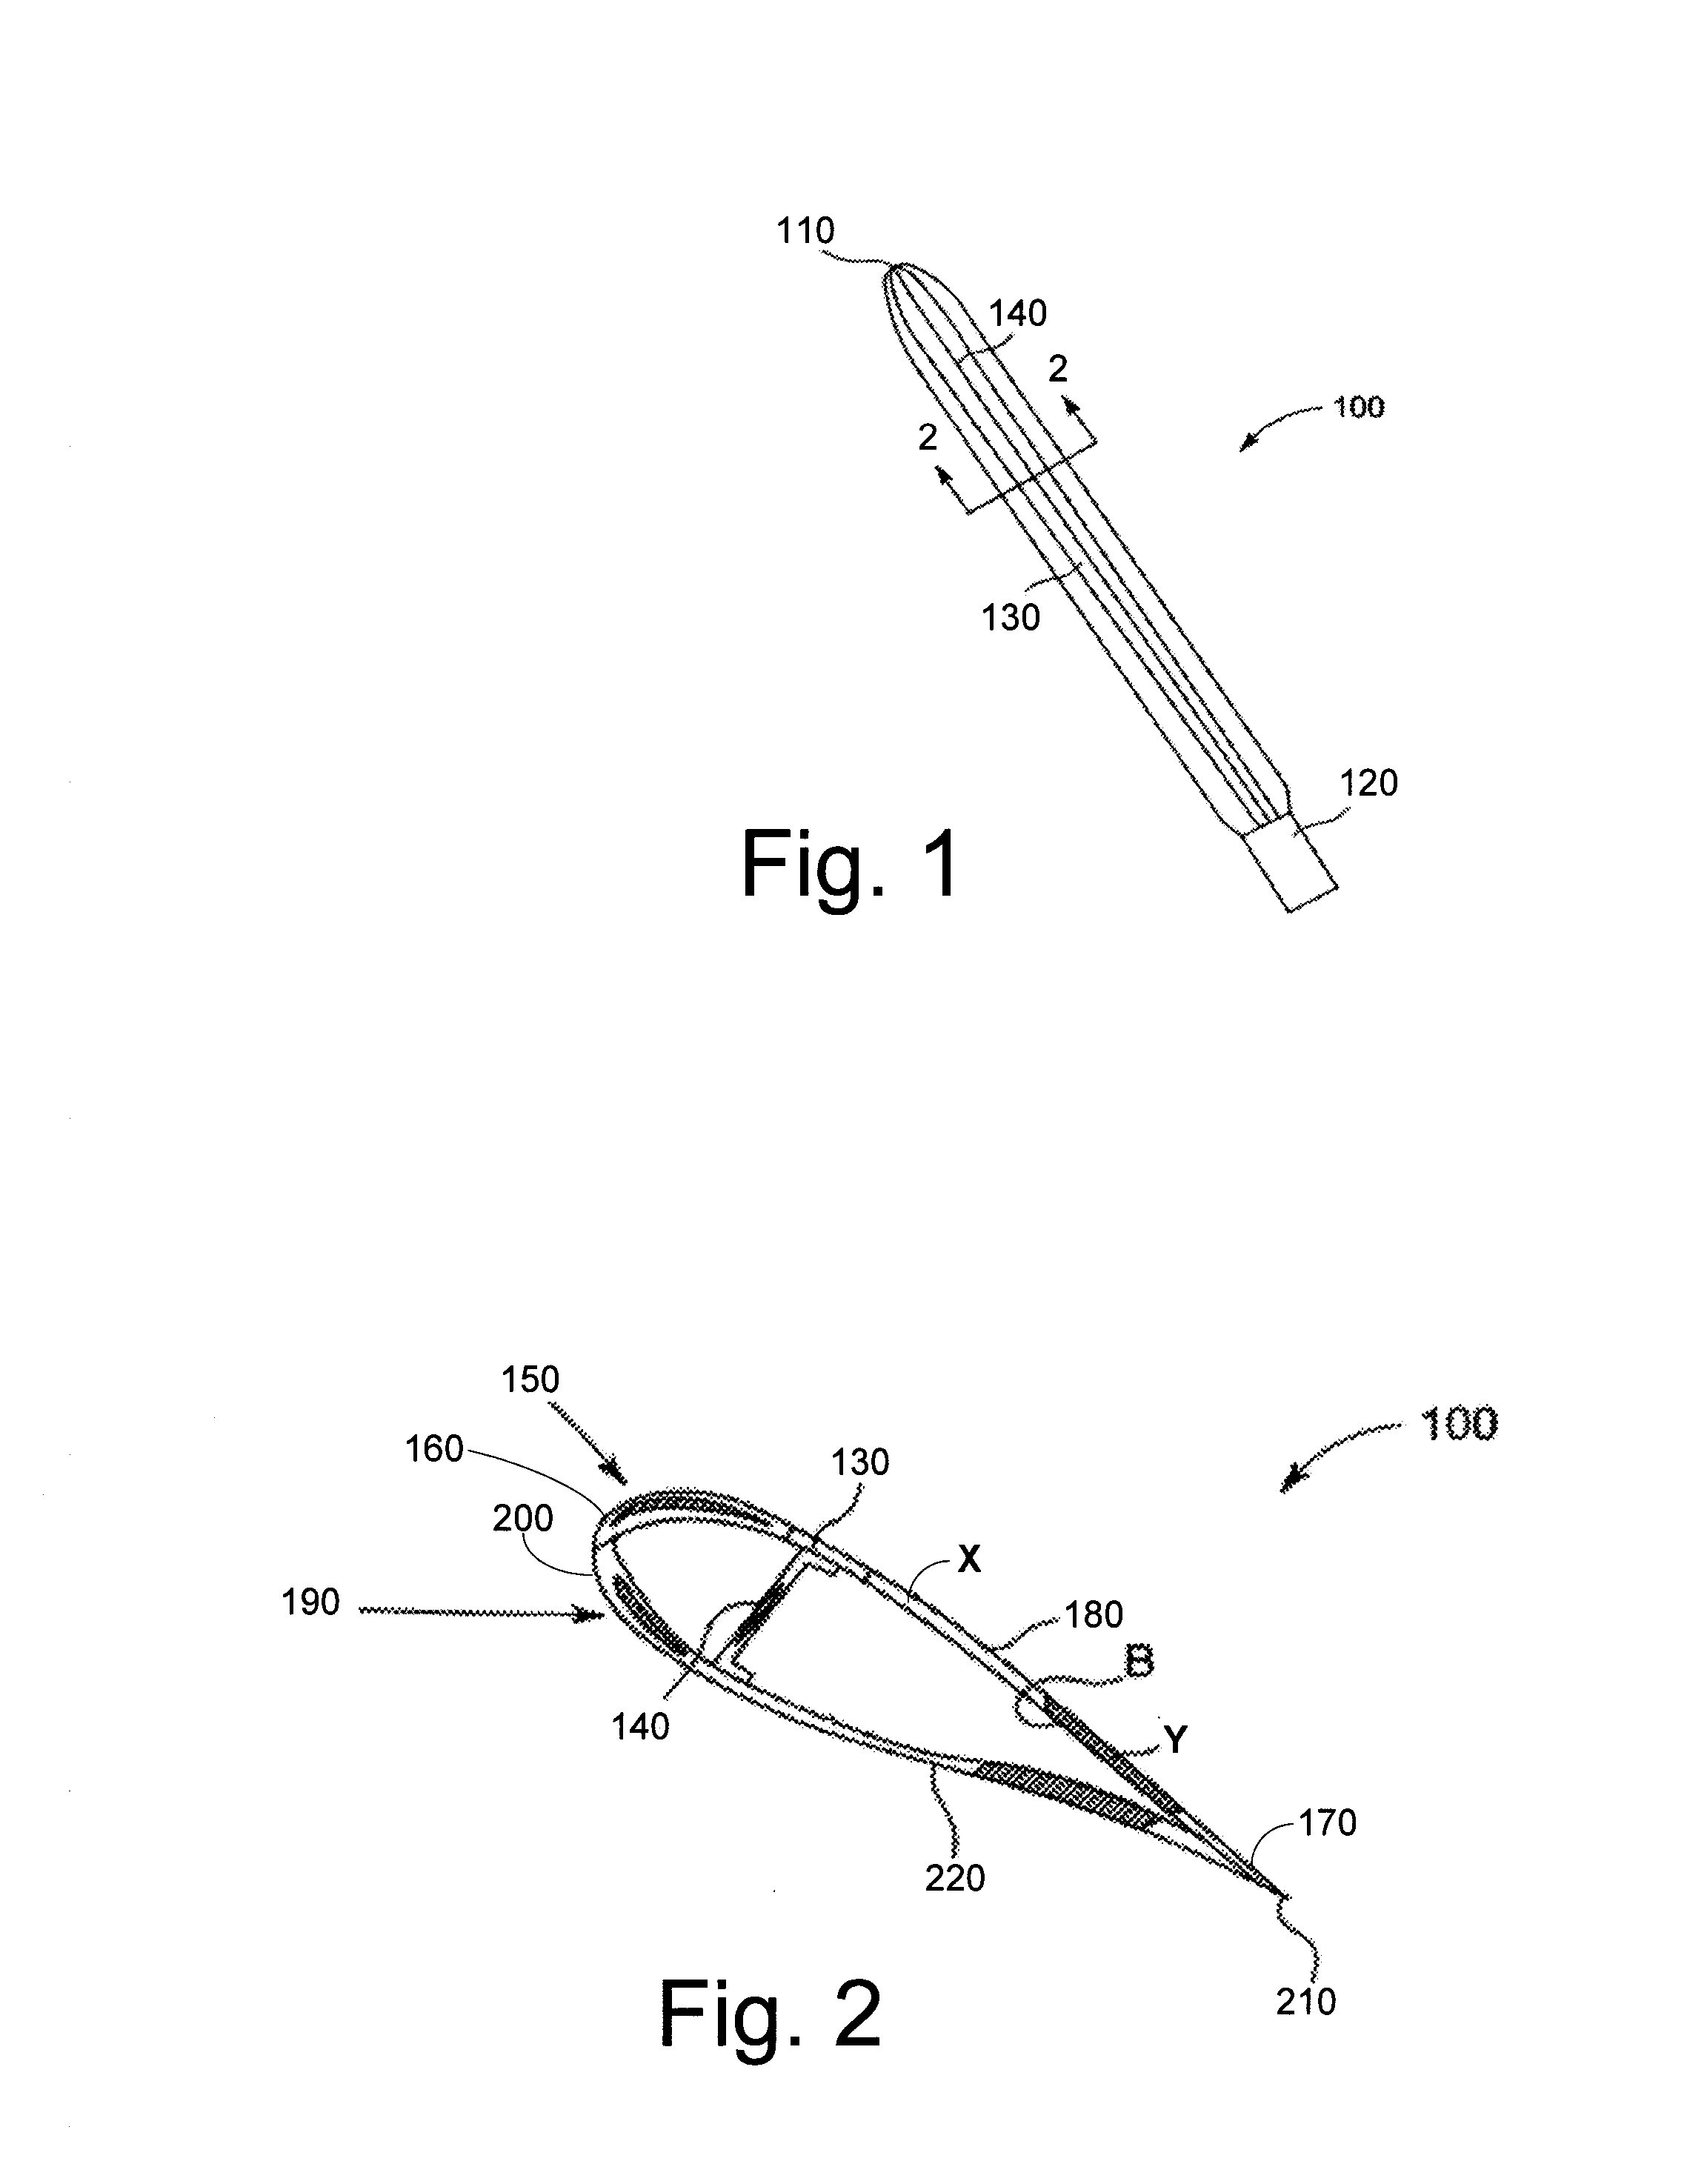 Thermographic Inspection System for Composite Wind Turbine Blade